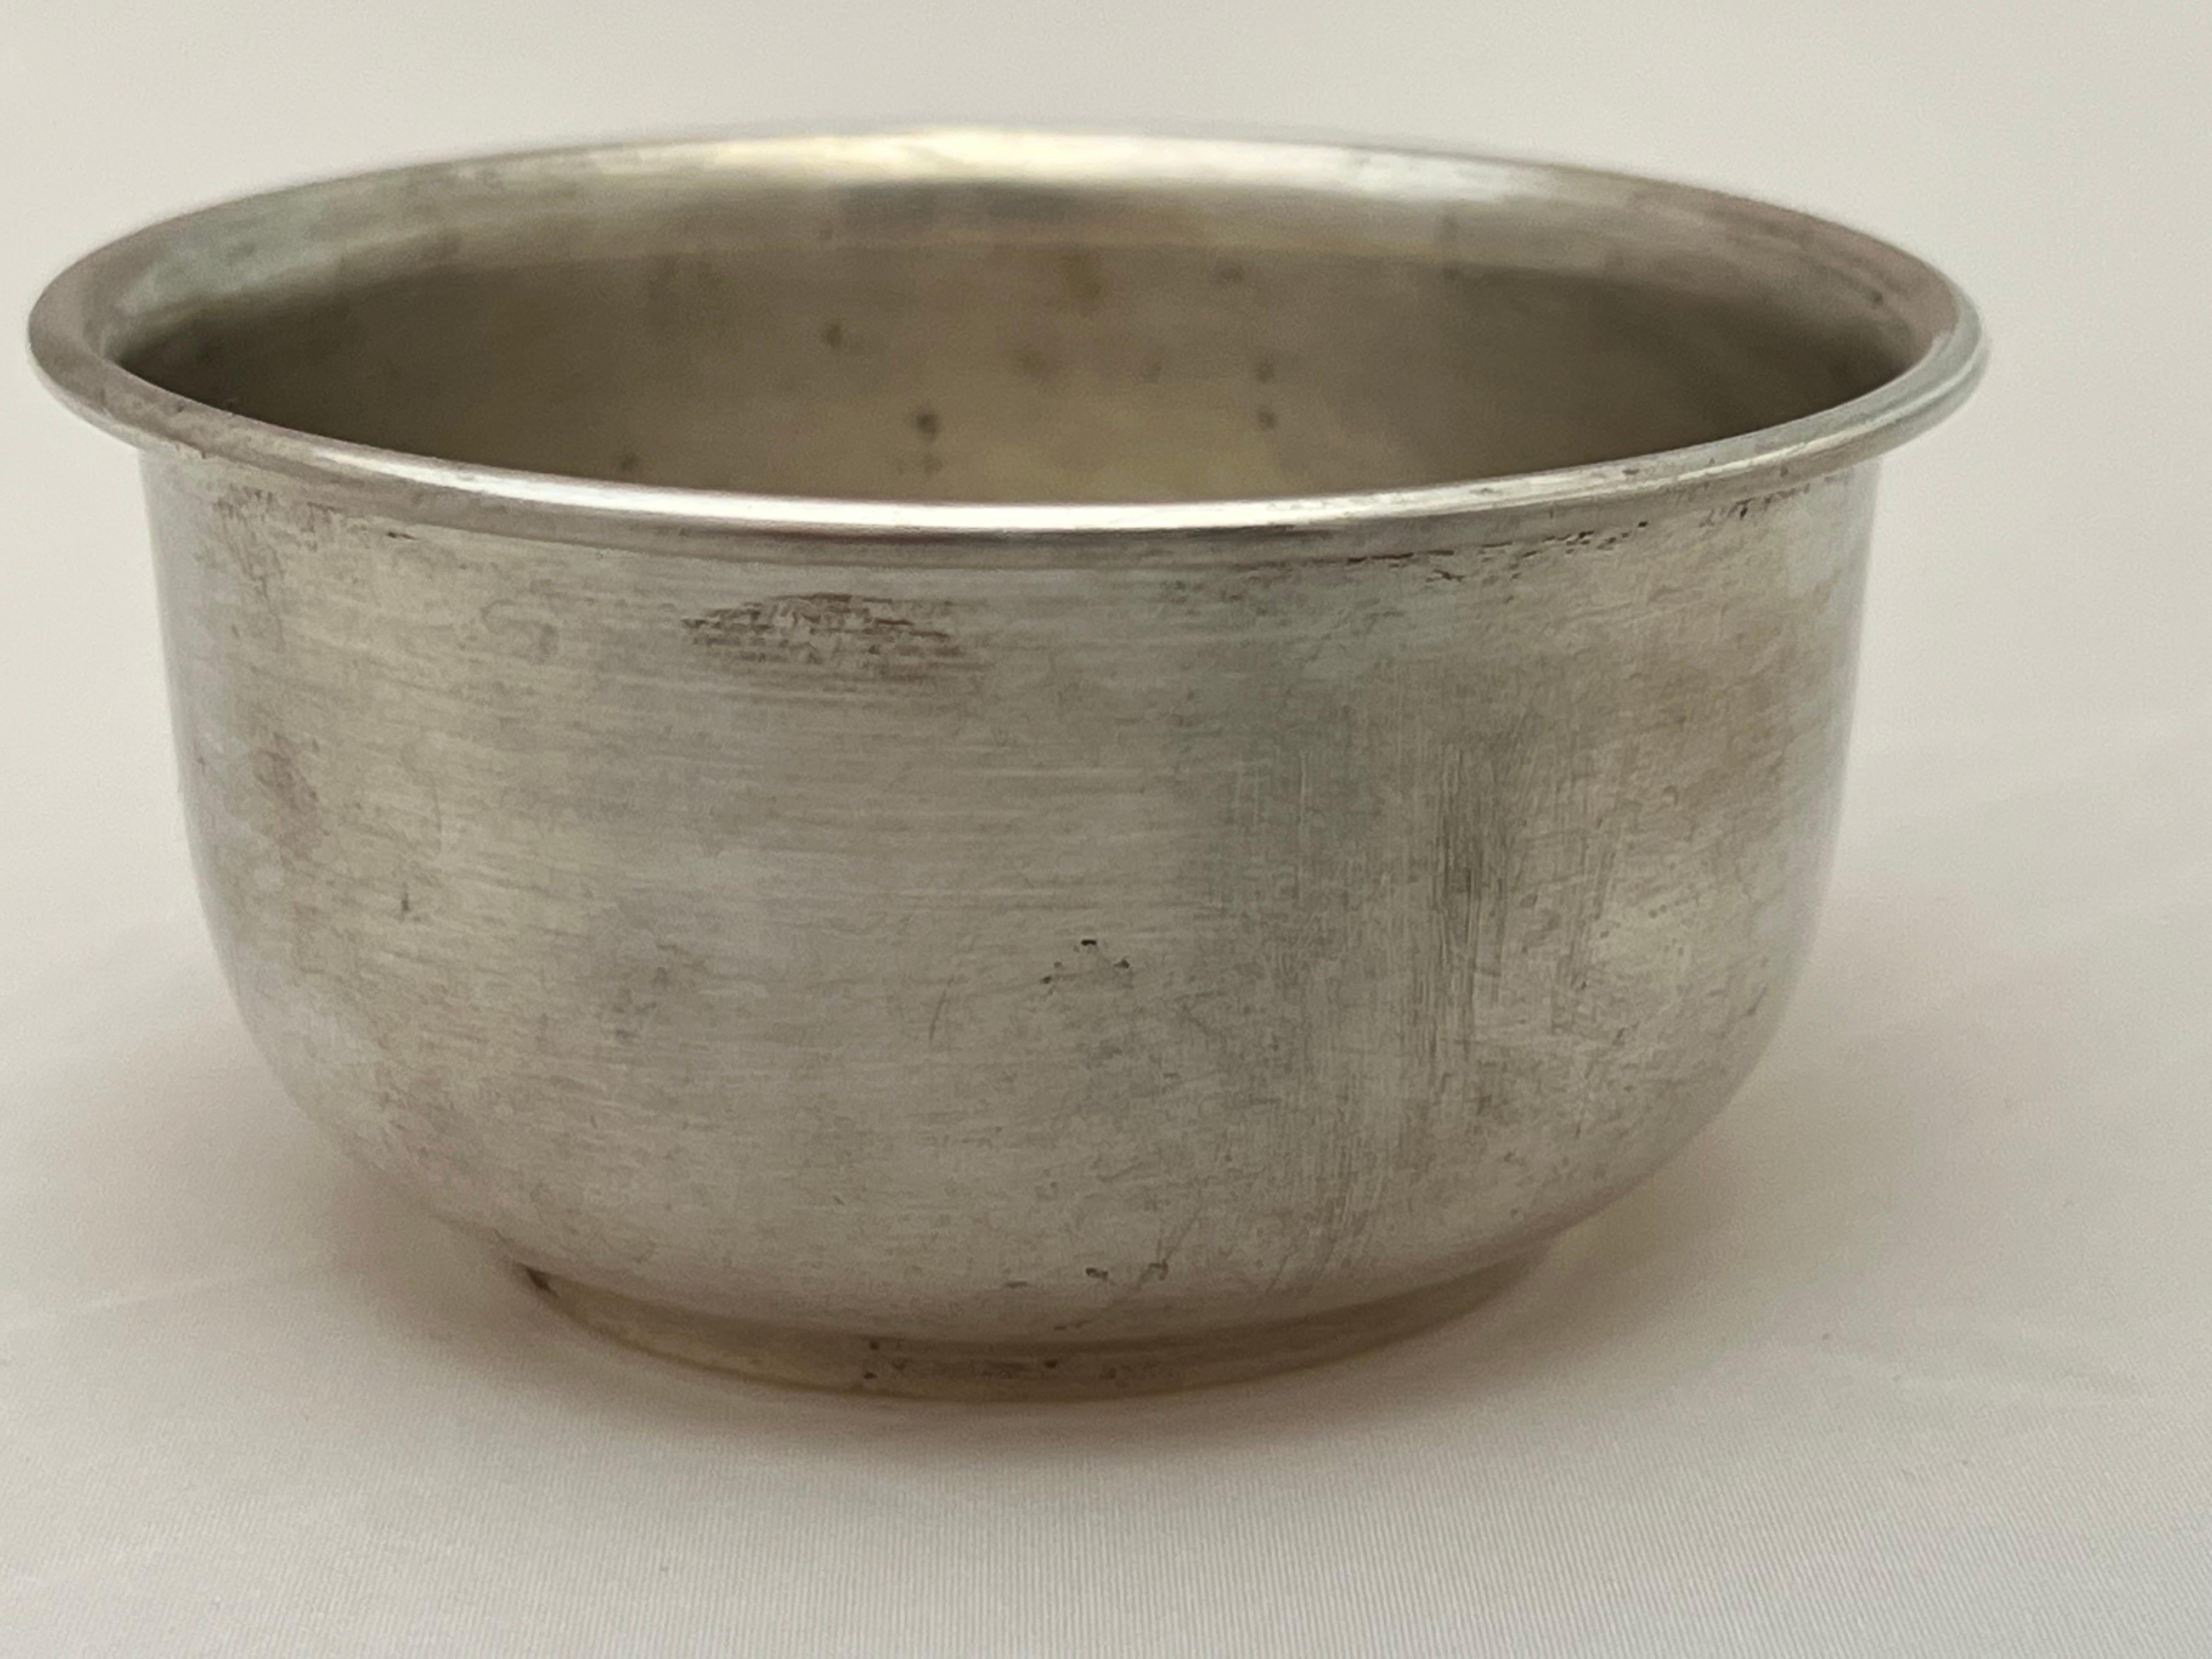 American Classical Petite Birks Sterling Silver Chutney Bowl